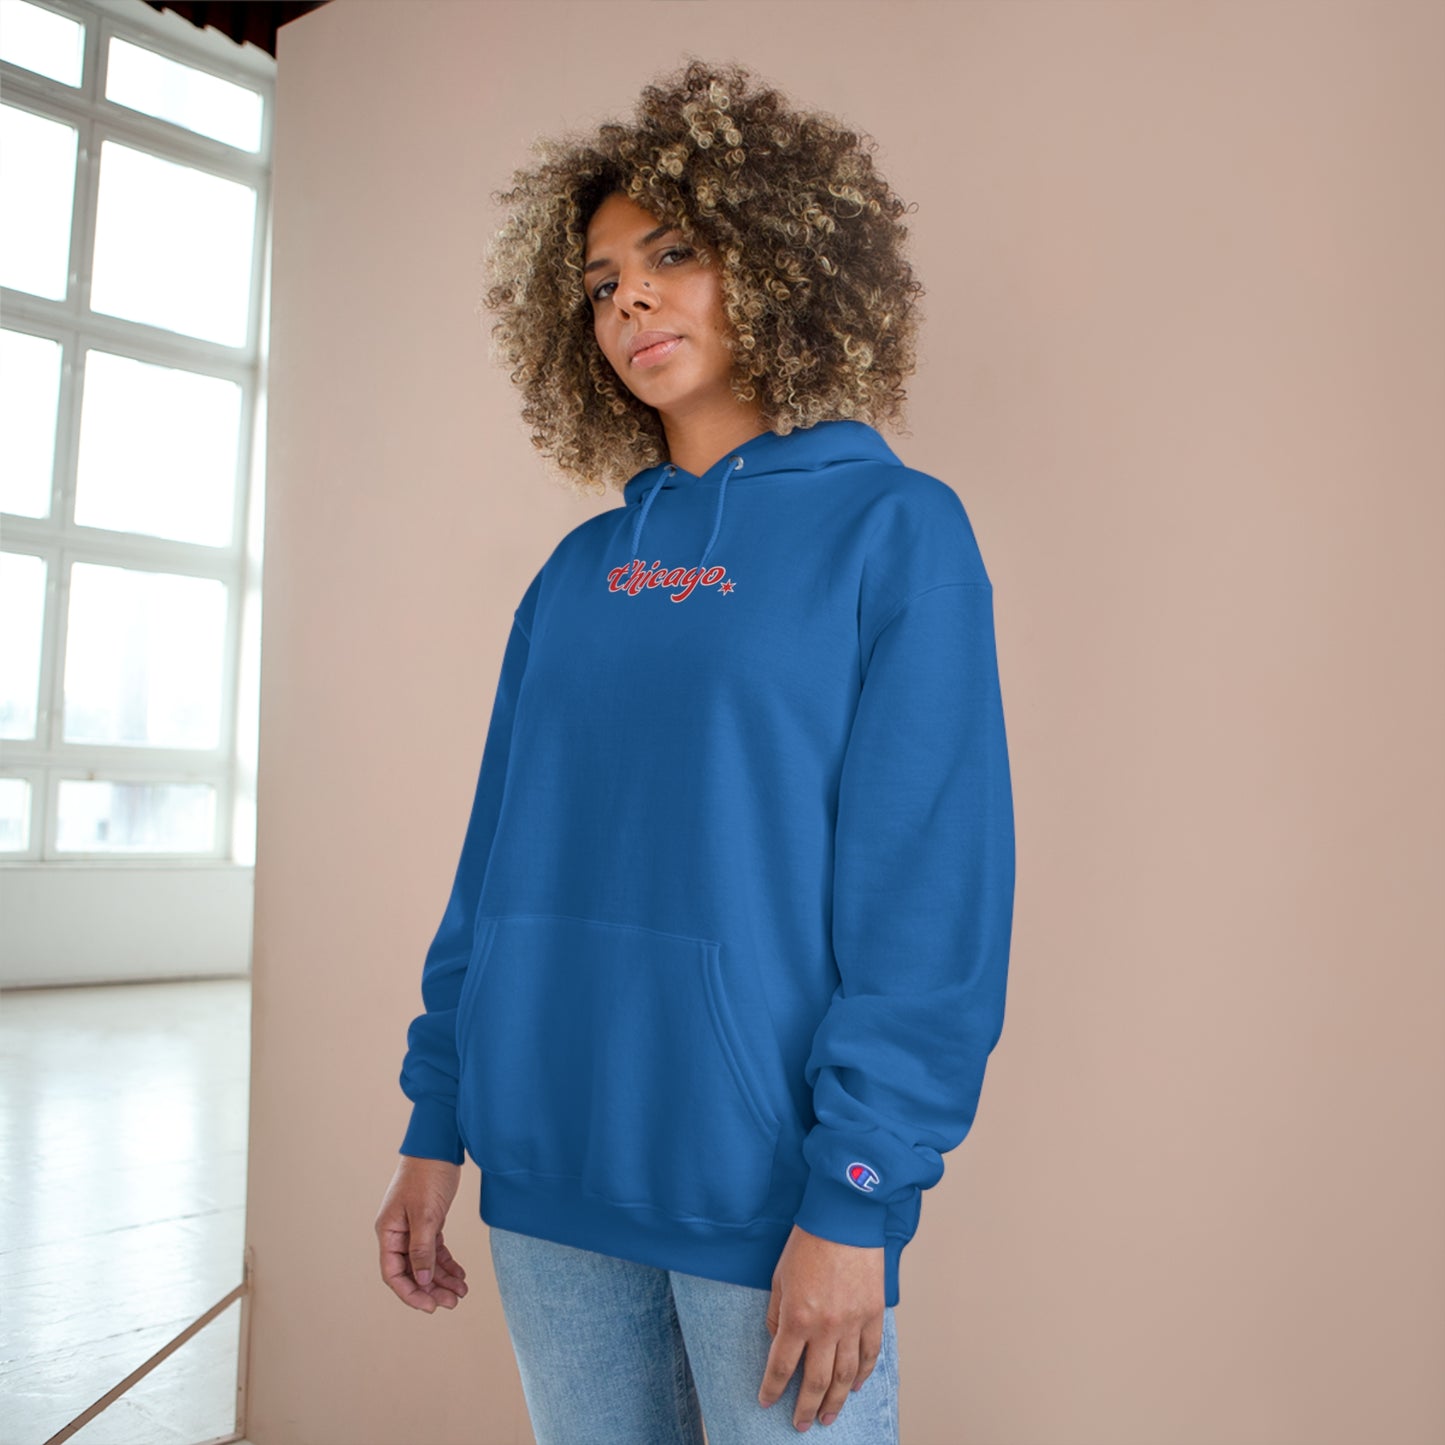 CHI-CTY - Classic Chicago | Hoodie